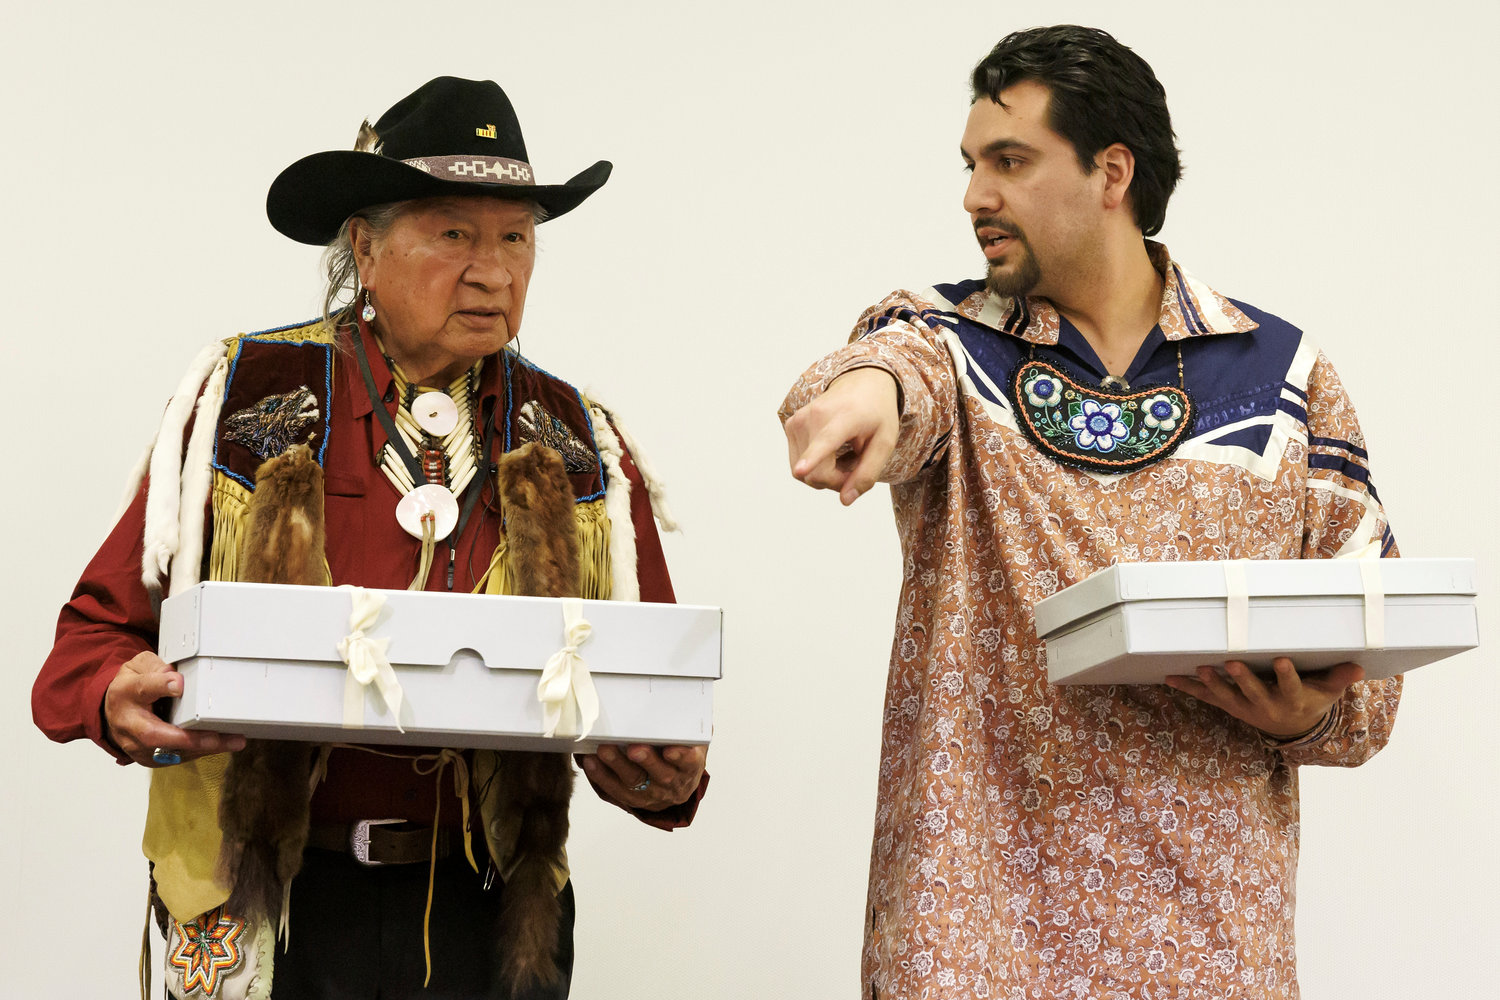  Two representatives of Haudenosaunee Confederation Clayton Logan, left, of the Seneca Nation, and Brennen Ferguson, of the Tuscarora Nation, hold boxes containing sacred objects during the ceremony of restitution of sacred object to the Haudenosaunee Confederation, at the Museum of Ethnography of Geneva in Switzerland on Tuesday, Feb. 7. 

The MEG has returned traditional sacred objects, a mask and a rattle, to the Haudenosaunee after 200 years in Switzerland. In addition to the Seneca and Tuscarora nations, the Haudenosaunee, “the people who are building the longhouse,” are comprised of the Mohawk, Oneida, Onondaga, and Cayuga Indian Nations.